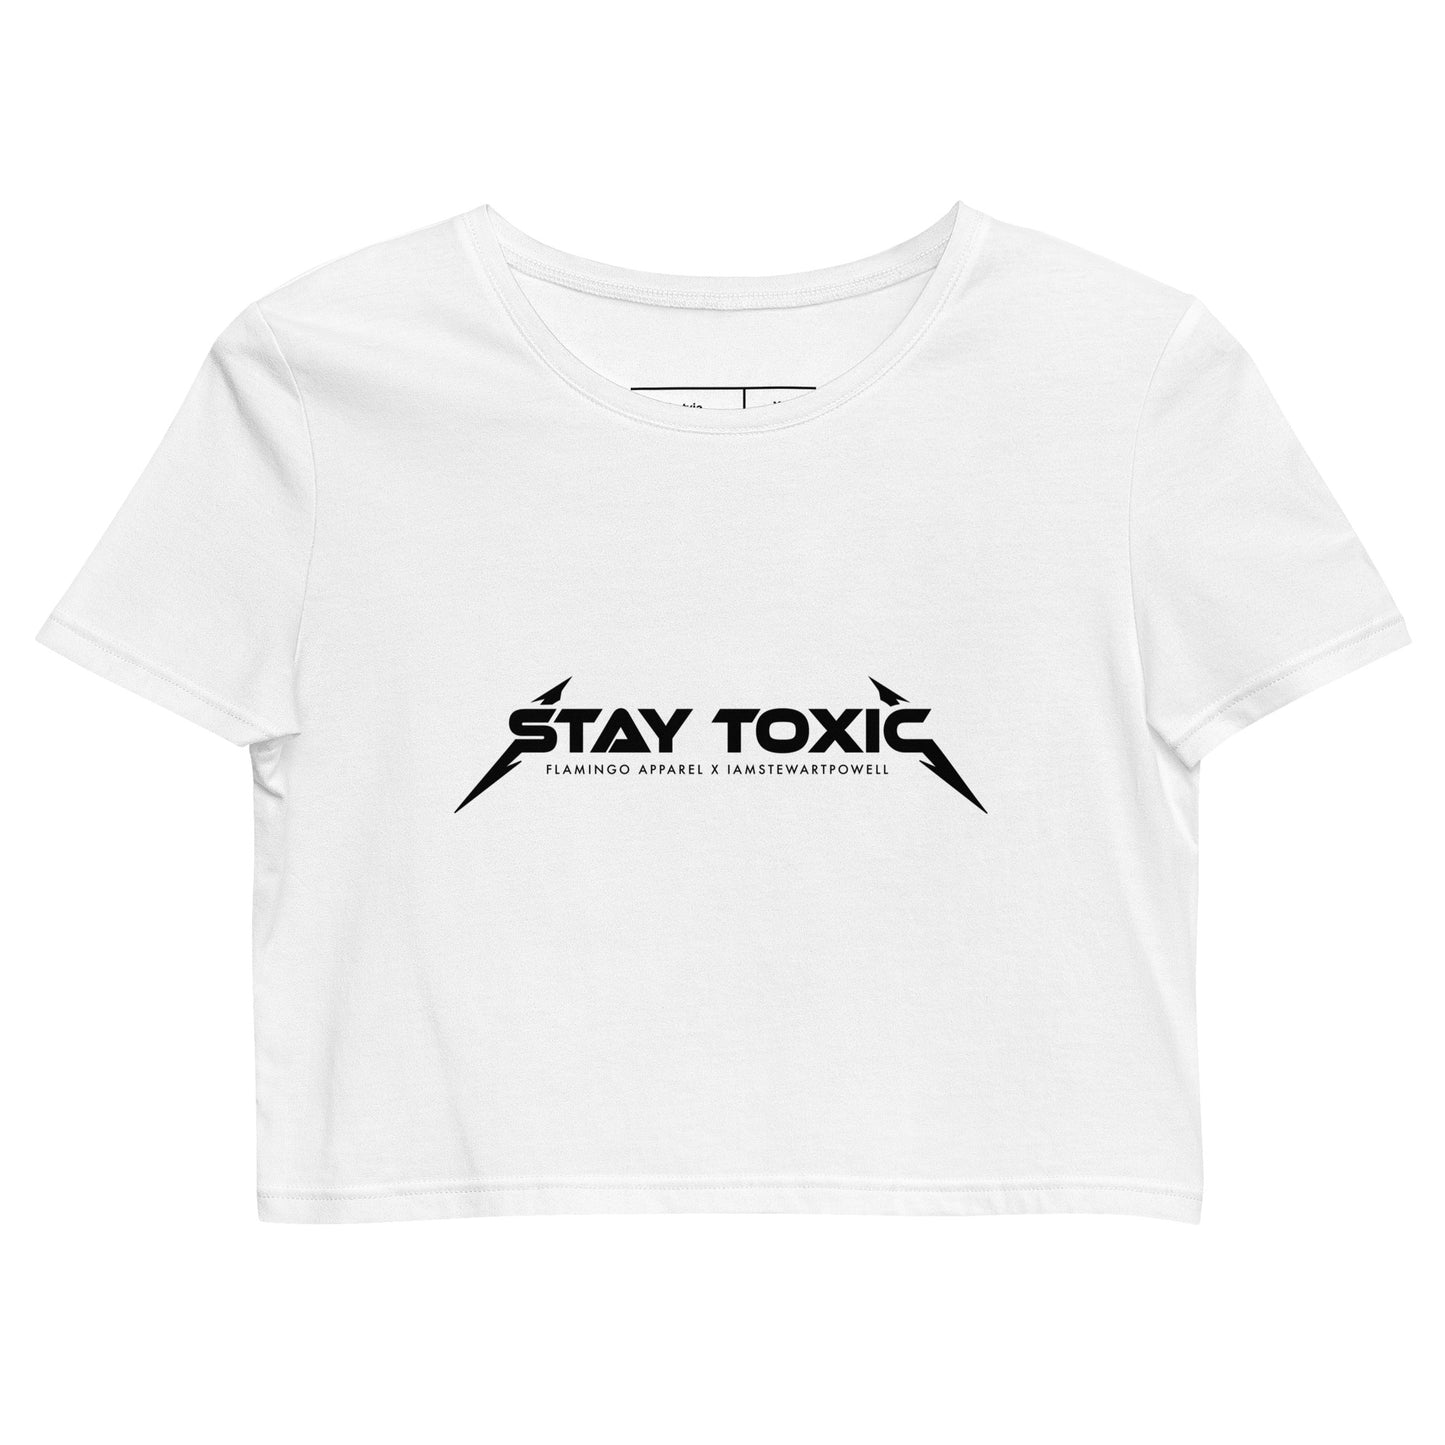 Stay Toxic - Crop Top